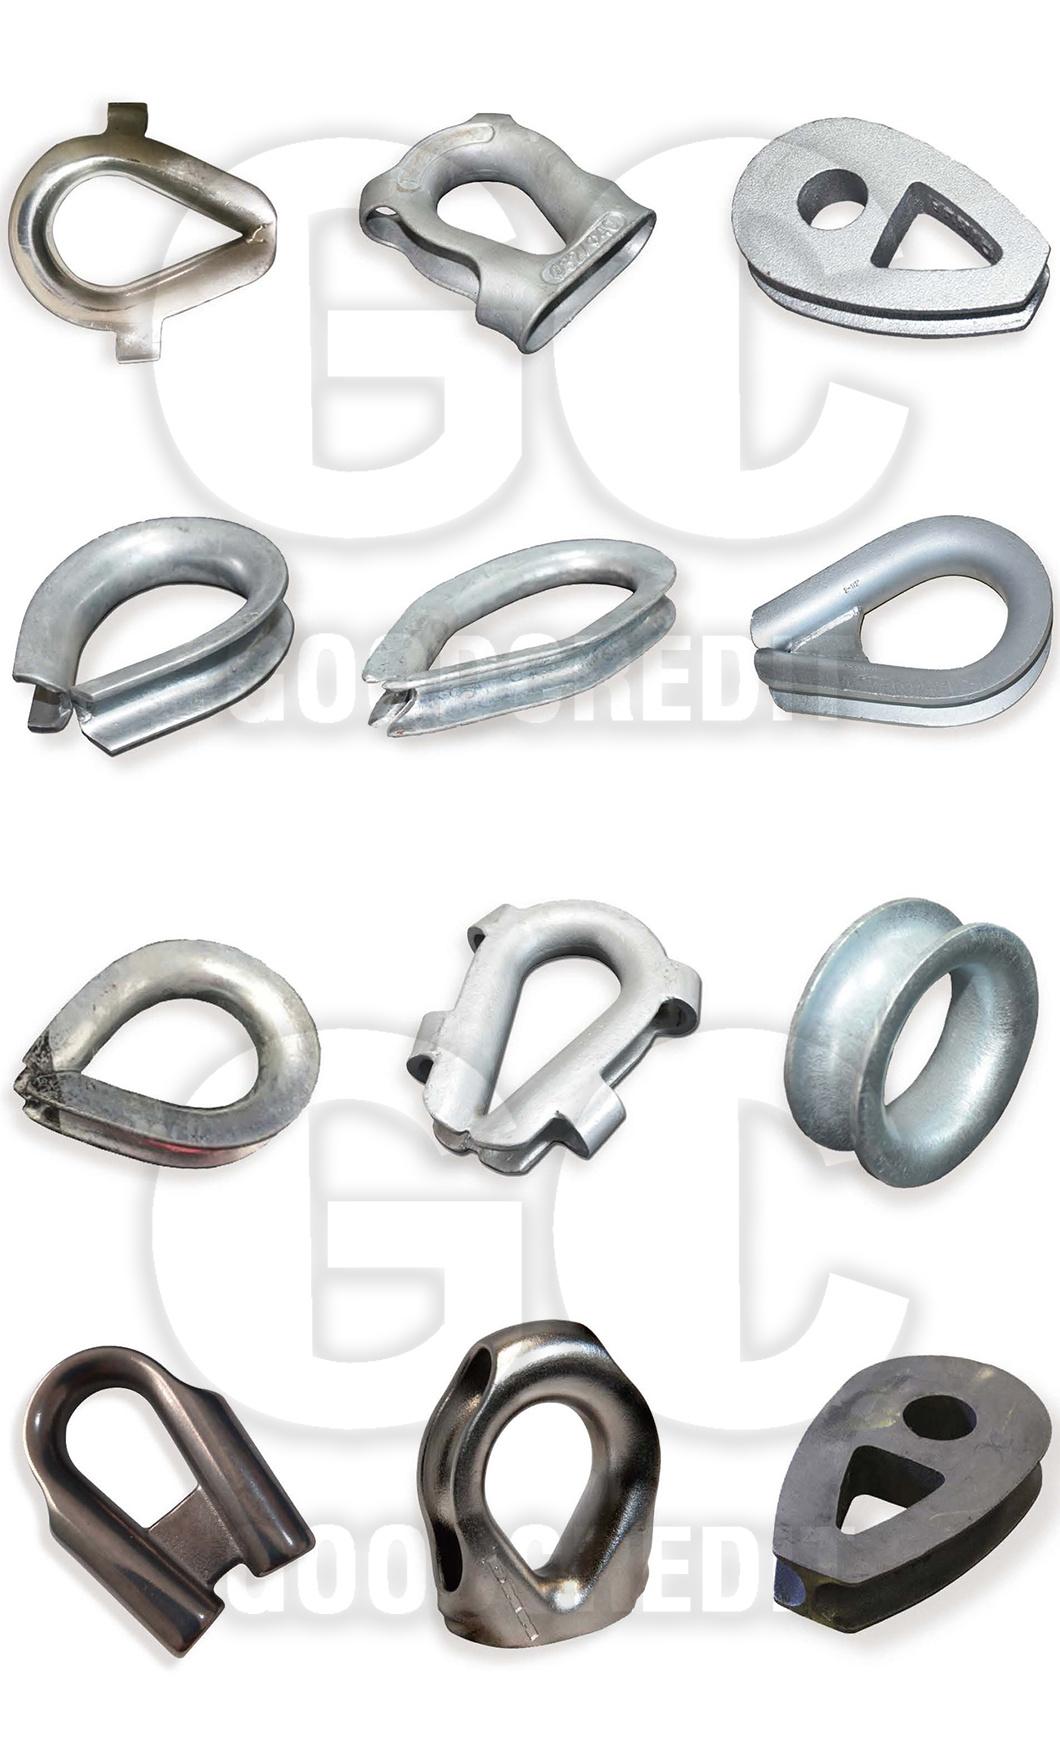 Standard Carbon Stainless Steel Wire Rope Thimble